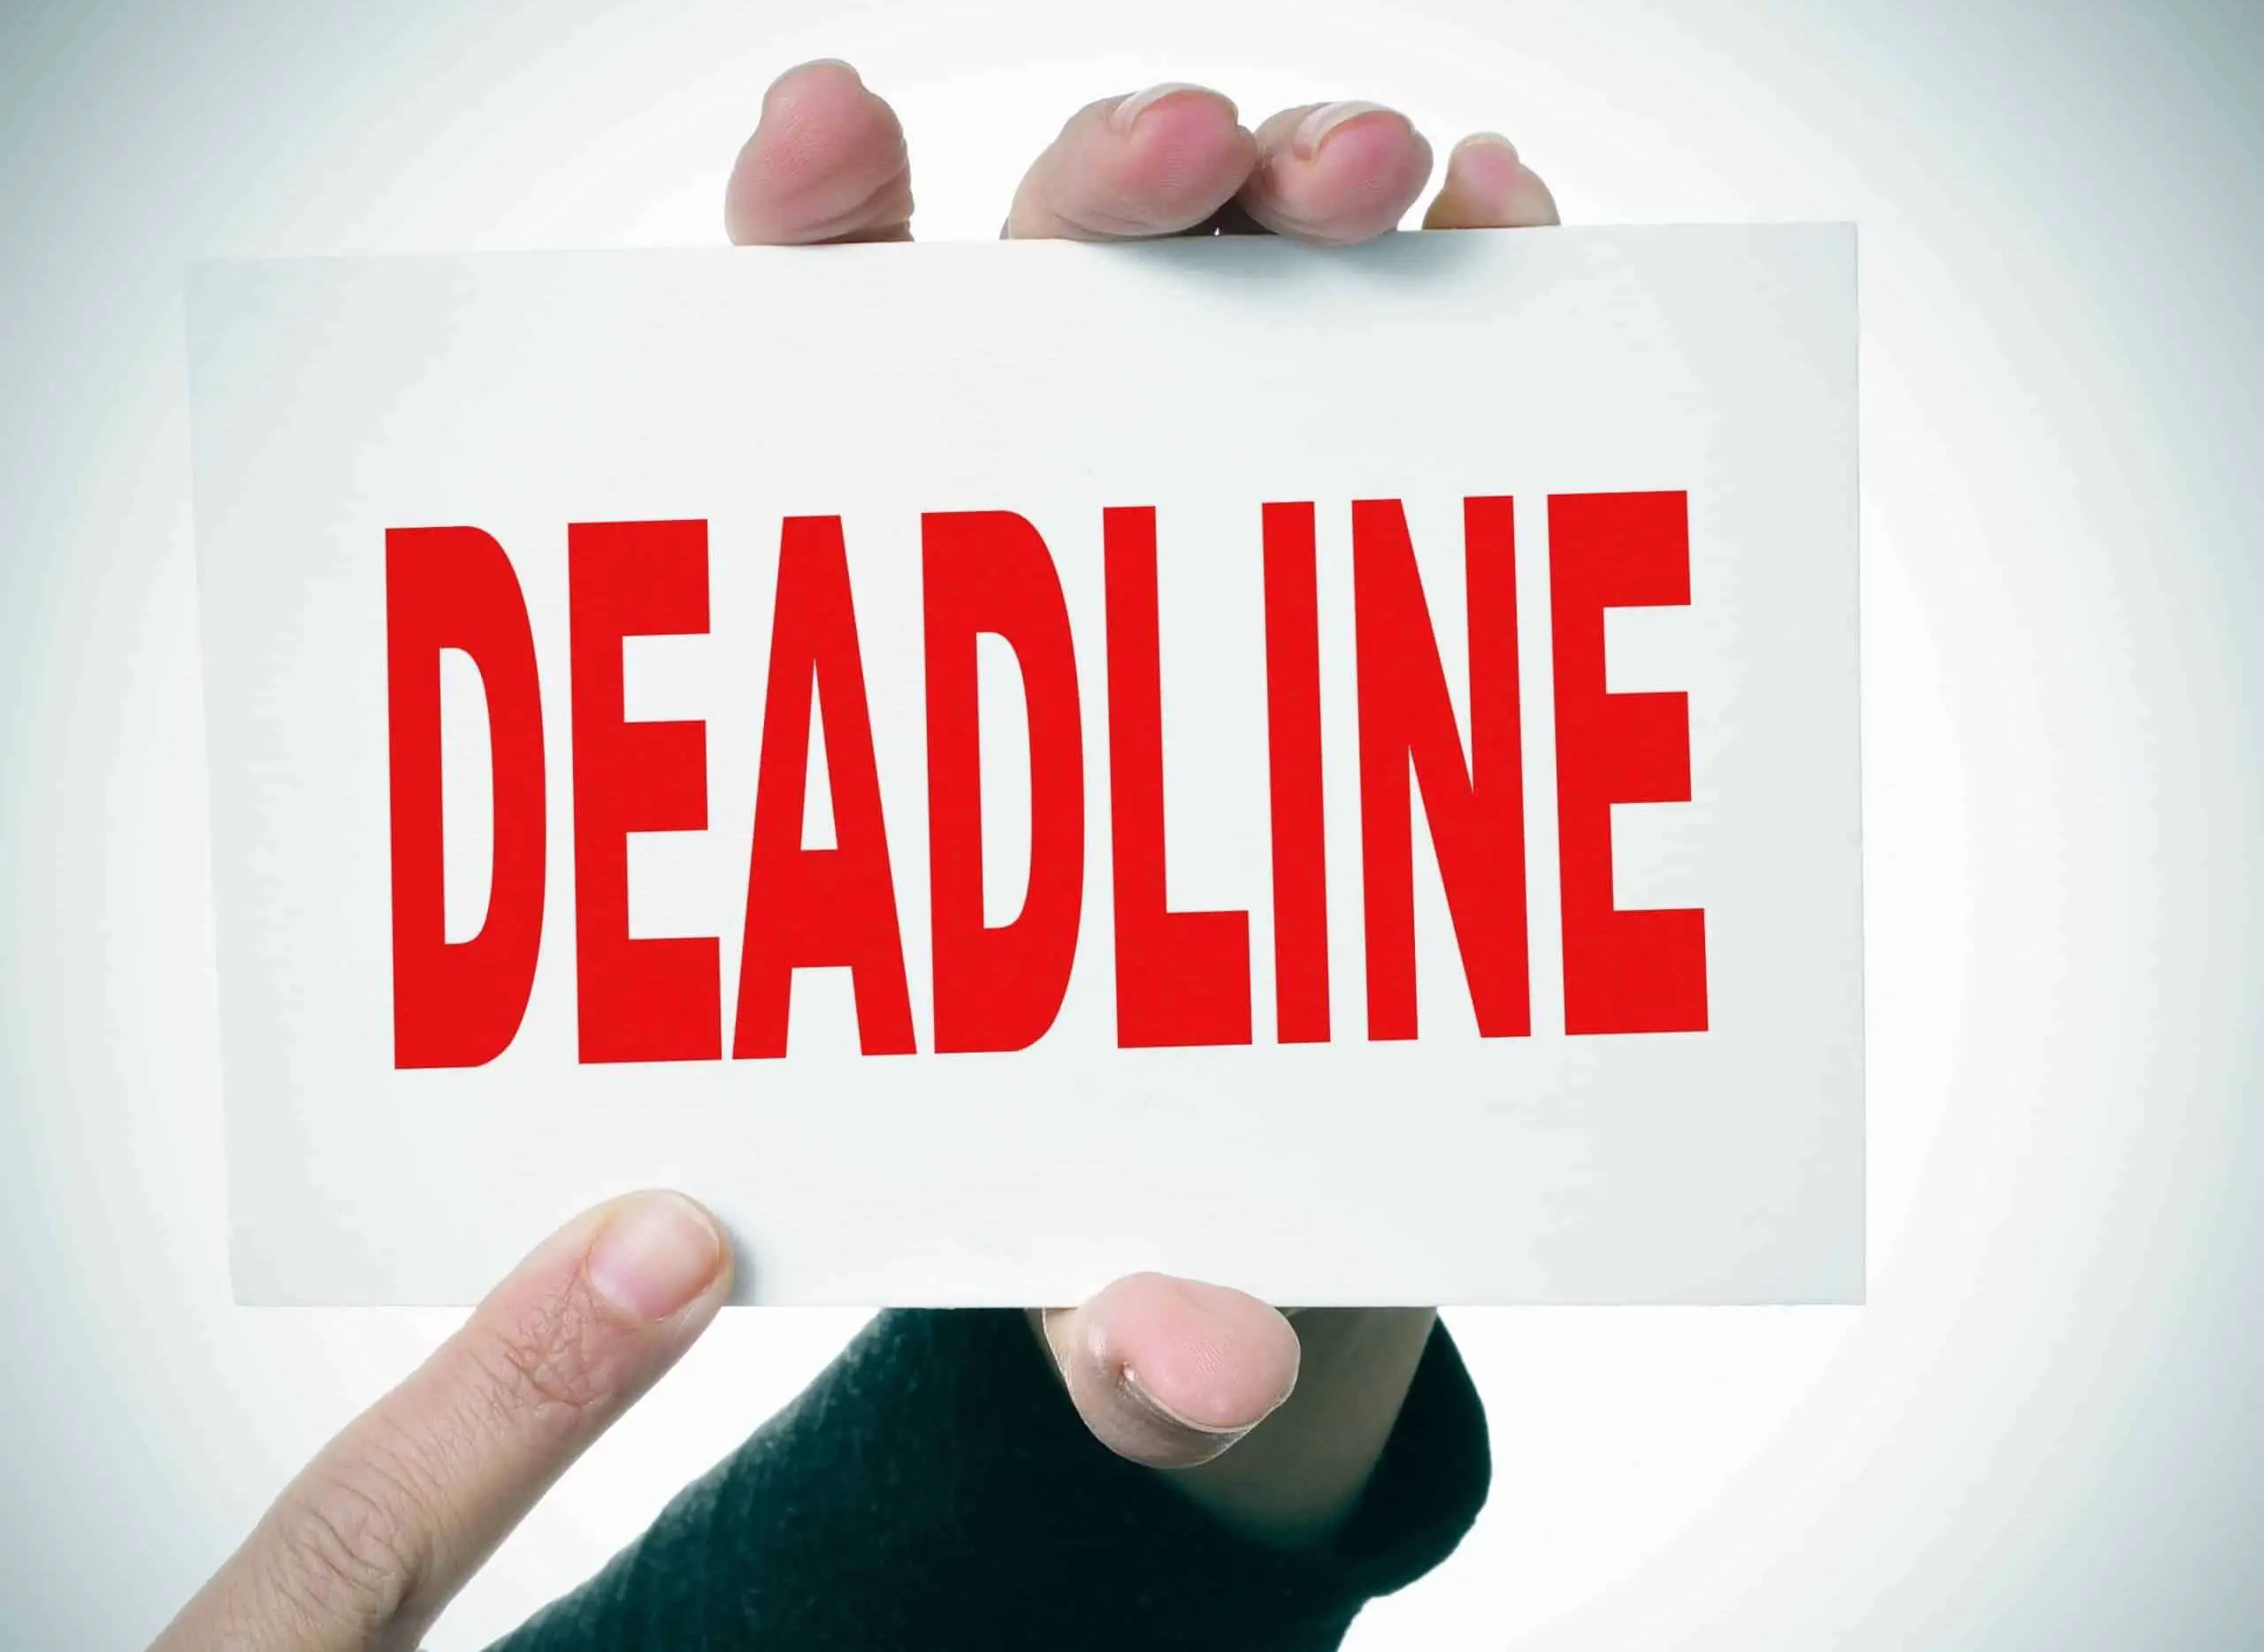 Upcoming Oct. 15 Deadline for IRAs and Taxes